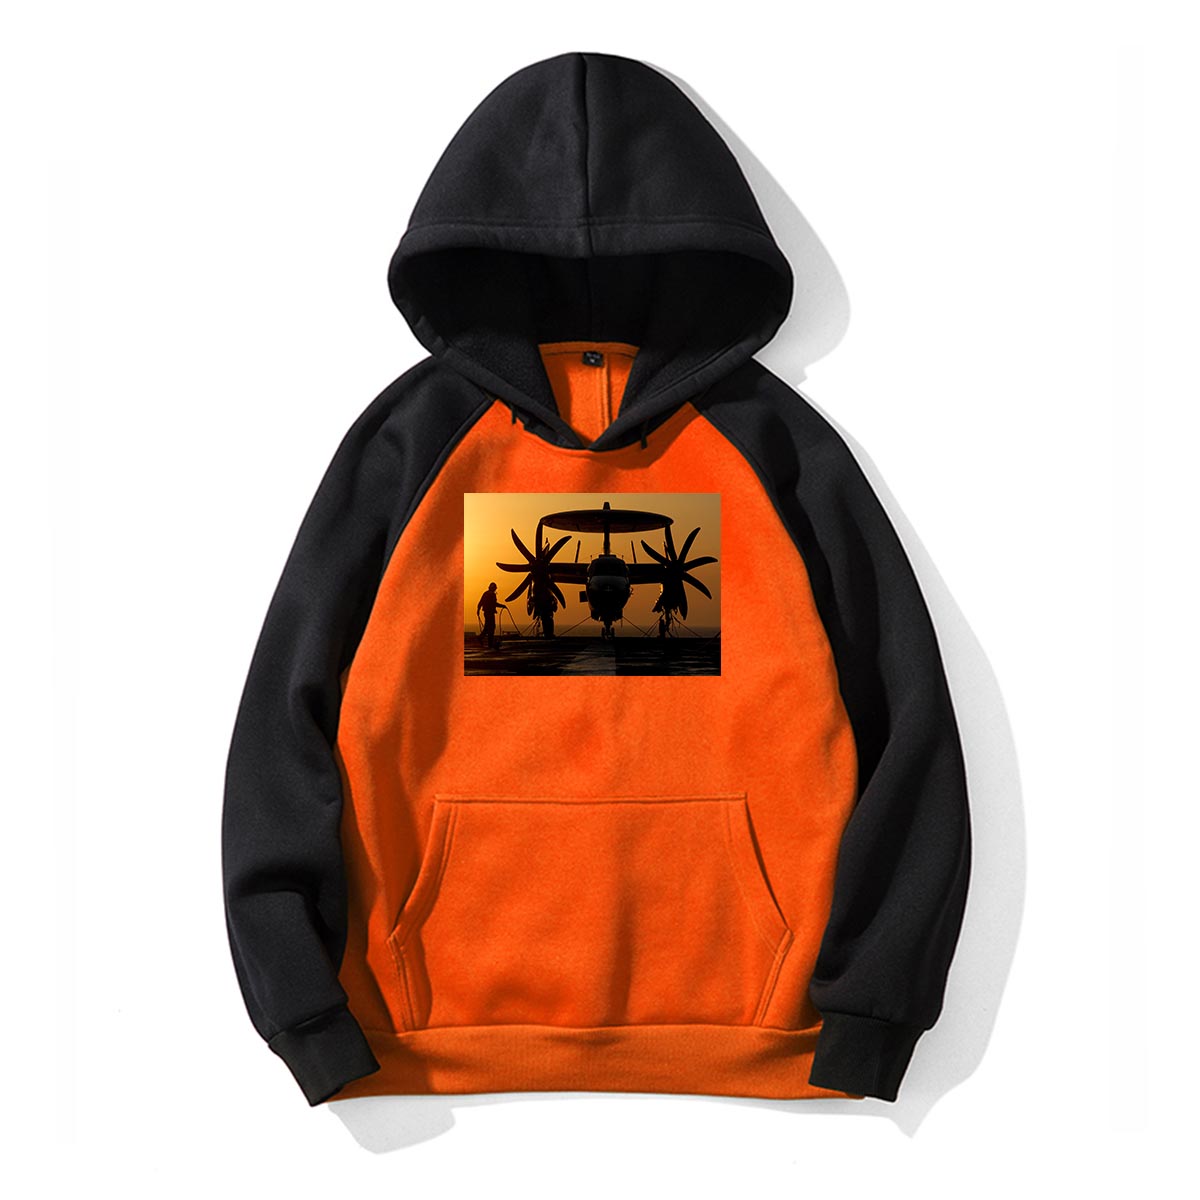 Military Plane at Sunset Designed Colourful Hoodies